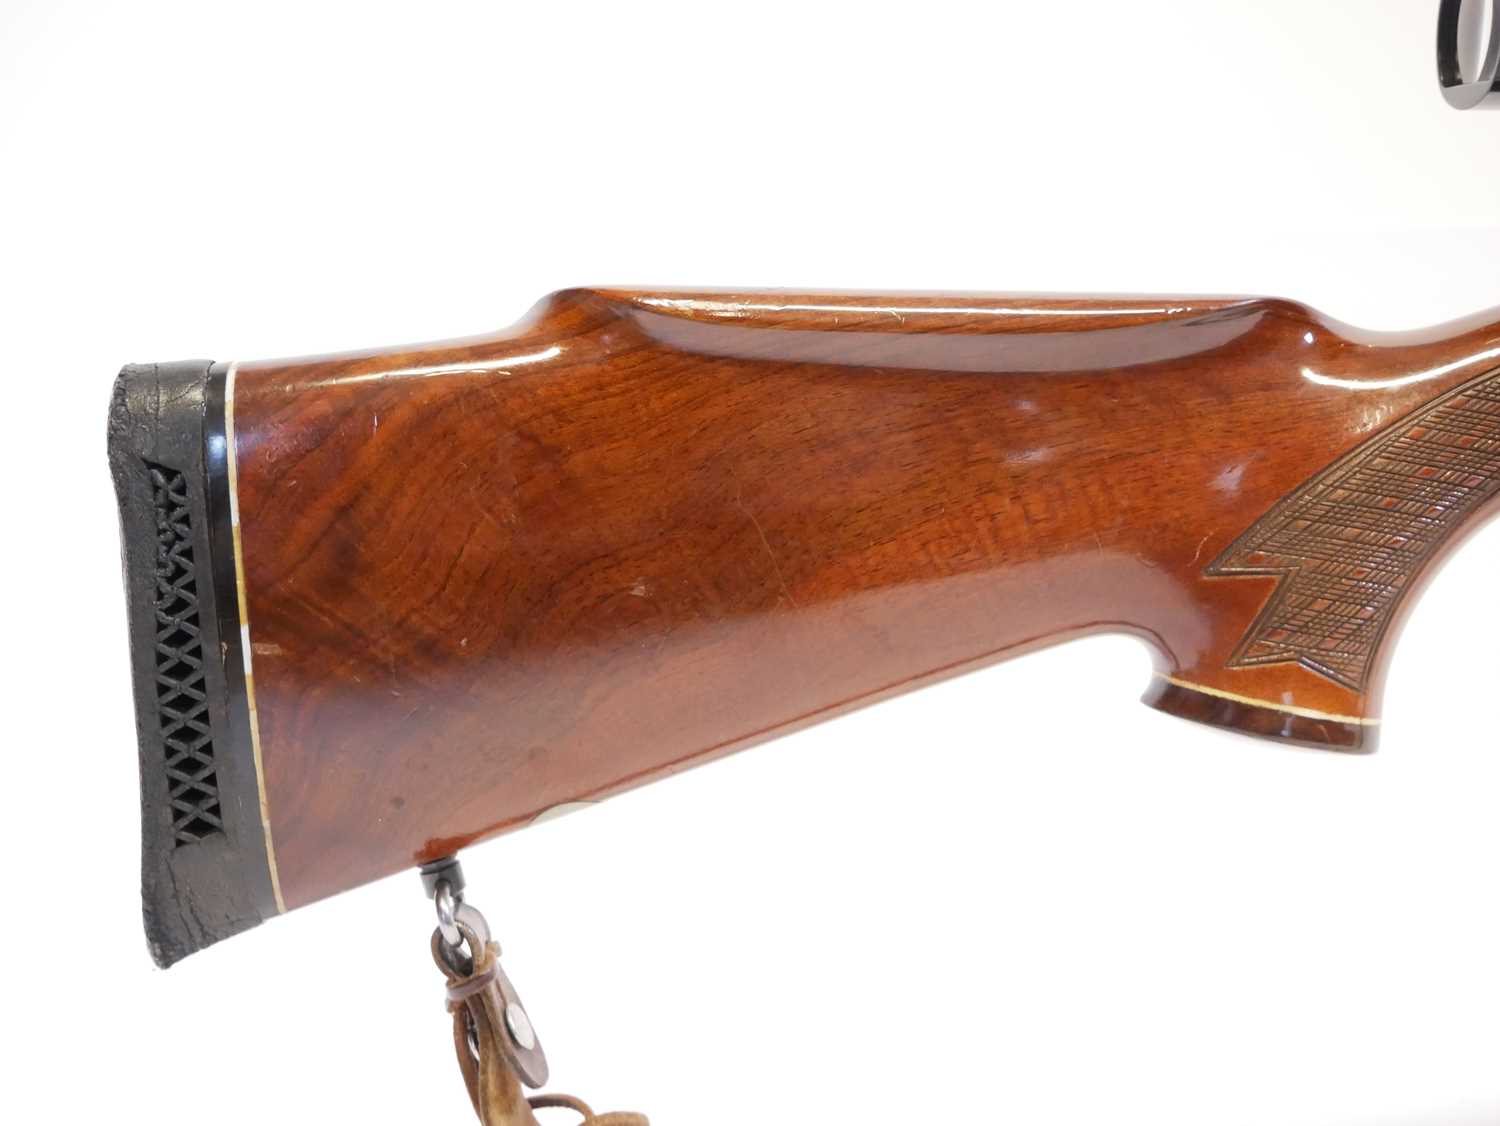 BSA .222 bolt action rifle, serial number 2P3784, 22 inch barrel, chequered stock with rosewood - Image 3 of 13